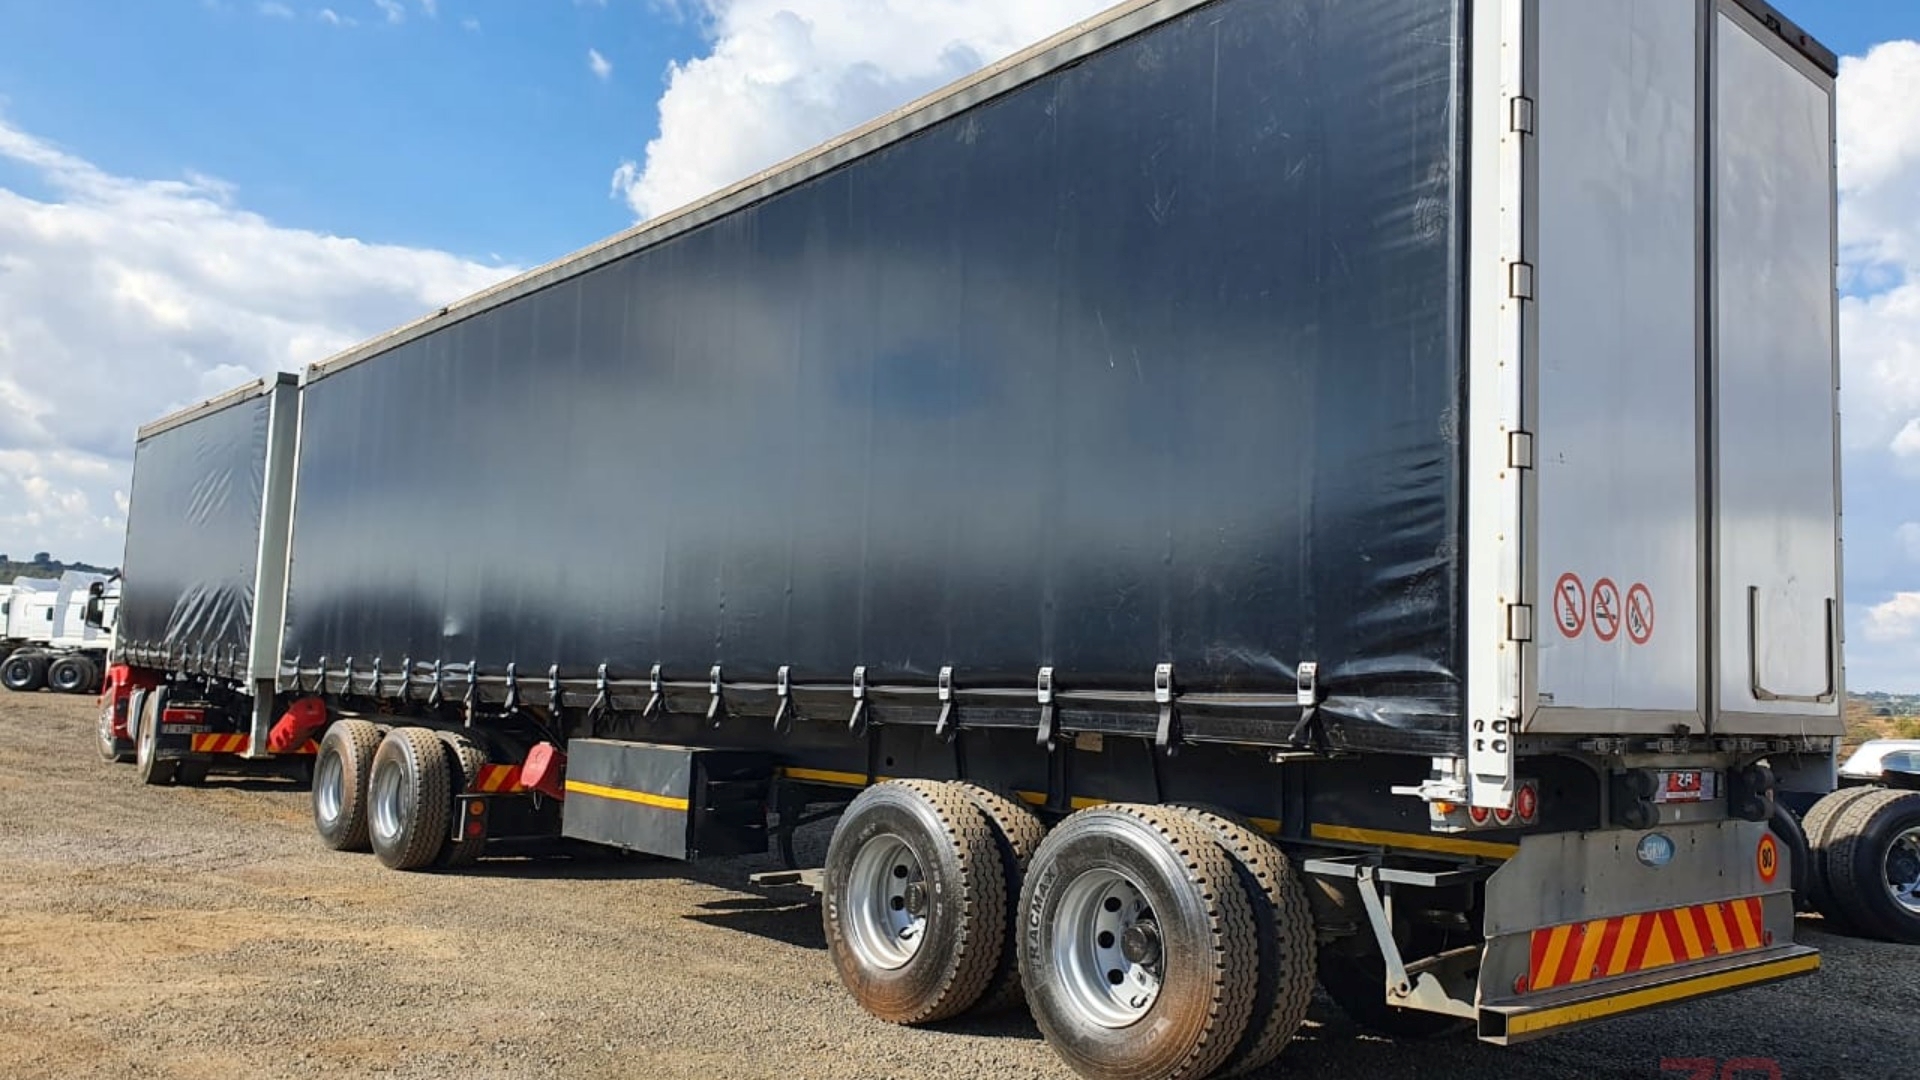 GRW Trailers Tautliner GRW SUPERLINK TAUTLINER TRAILER 2017 for sale by ZA Trucks and Trailers Sales | Truck & Trailer Marketplaces